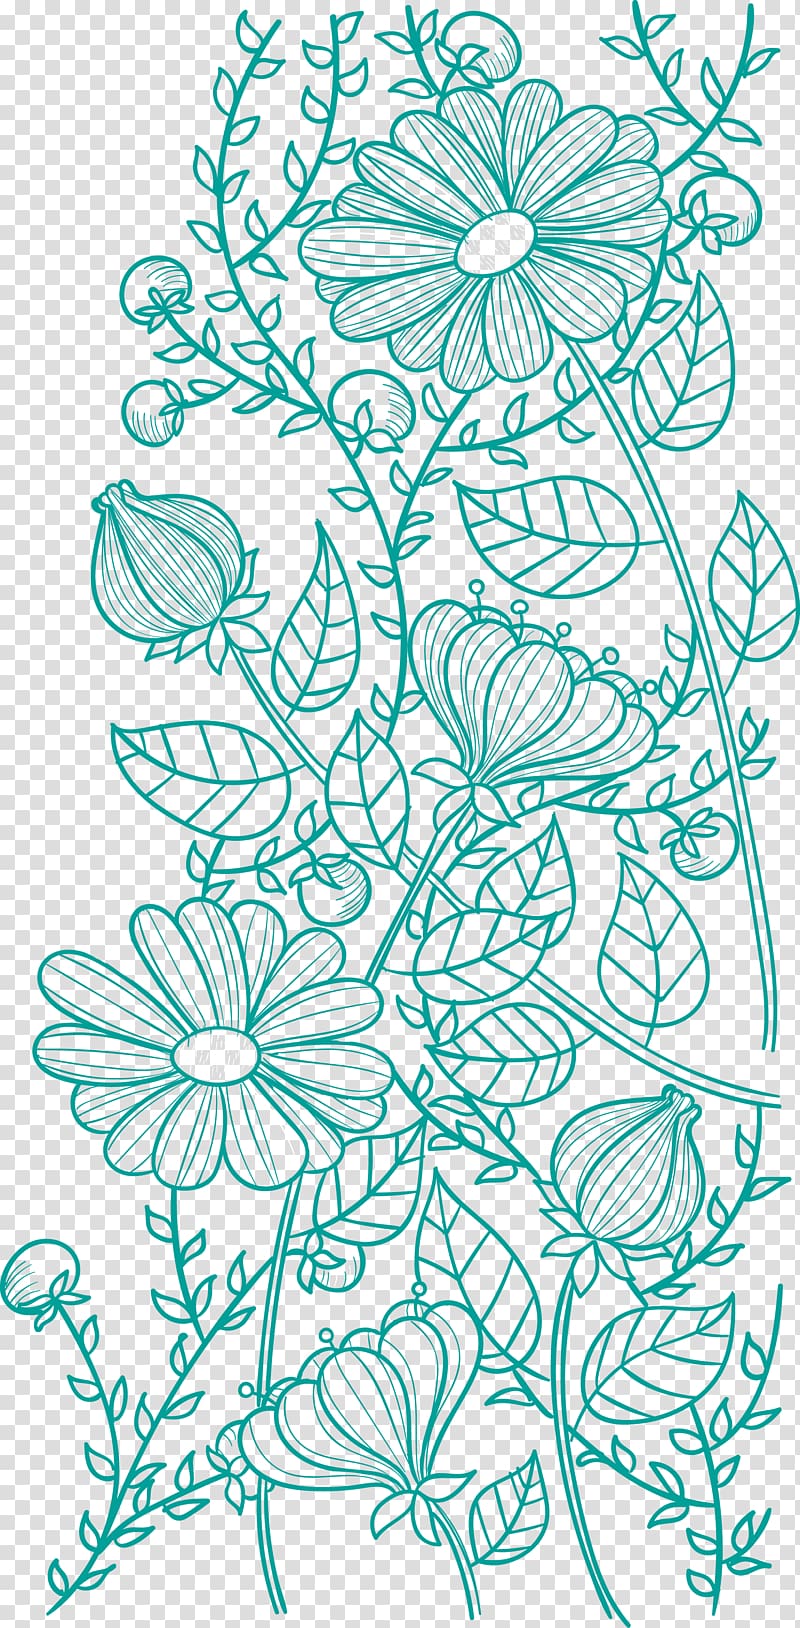 Hand drawn hibiscus flower sketch Royalty Free Vector Image